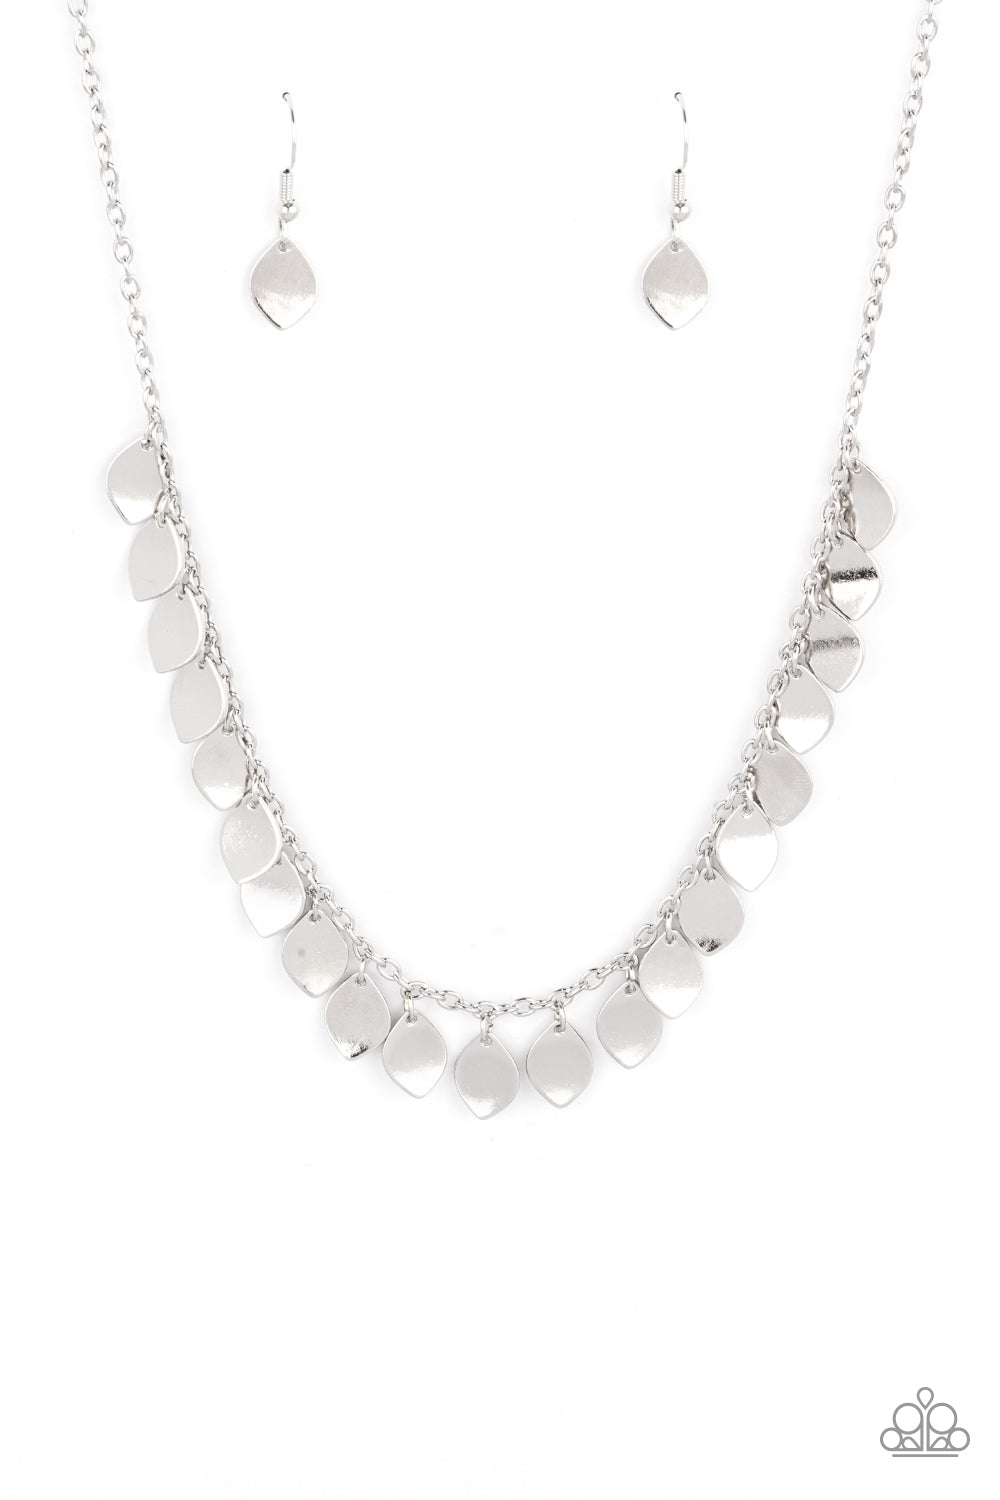 Dainty DISCovery - Silver Paparazzi Necklace